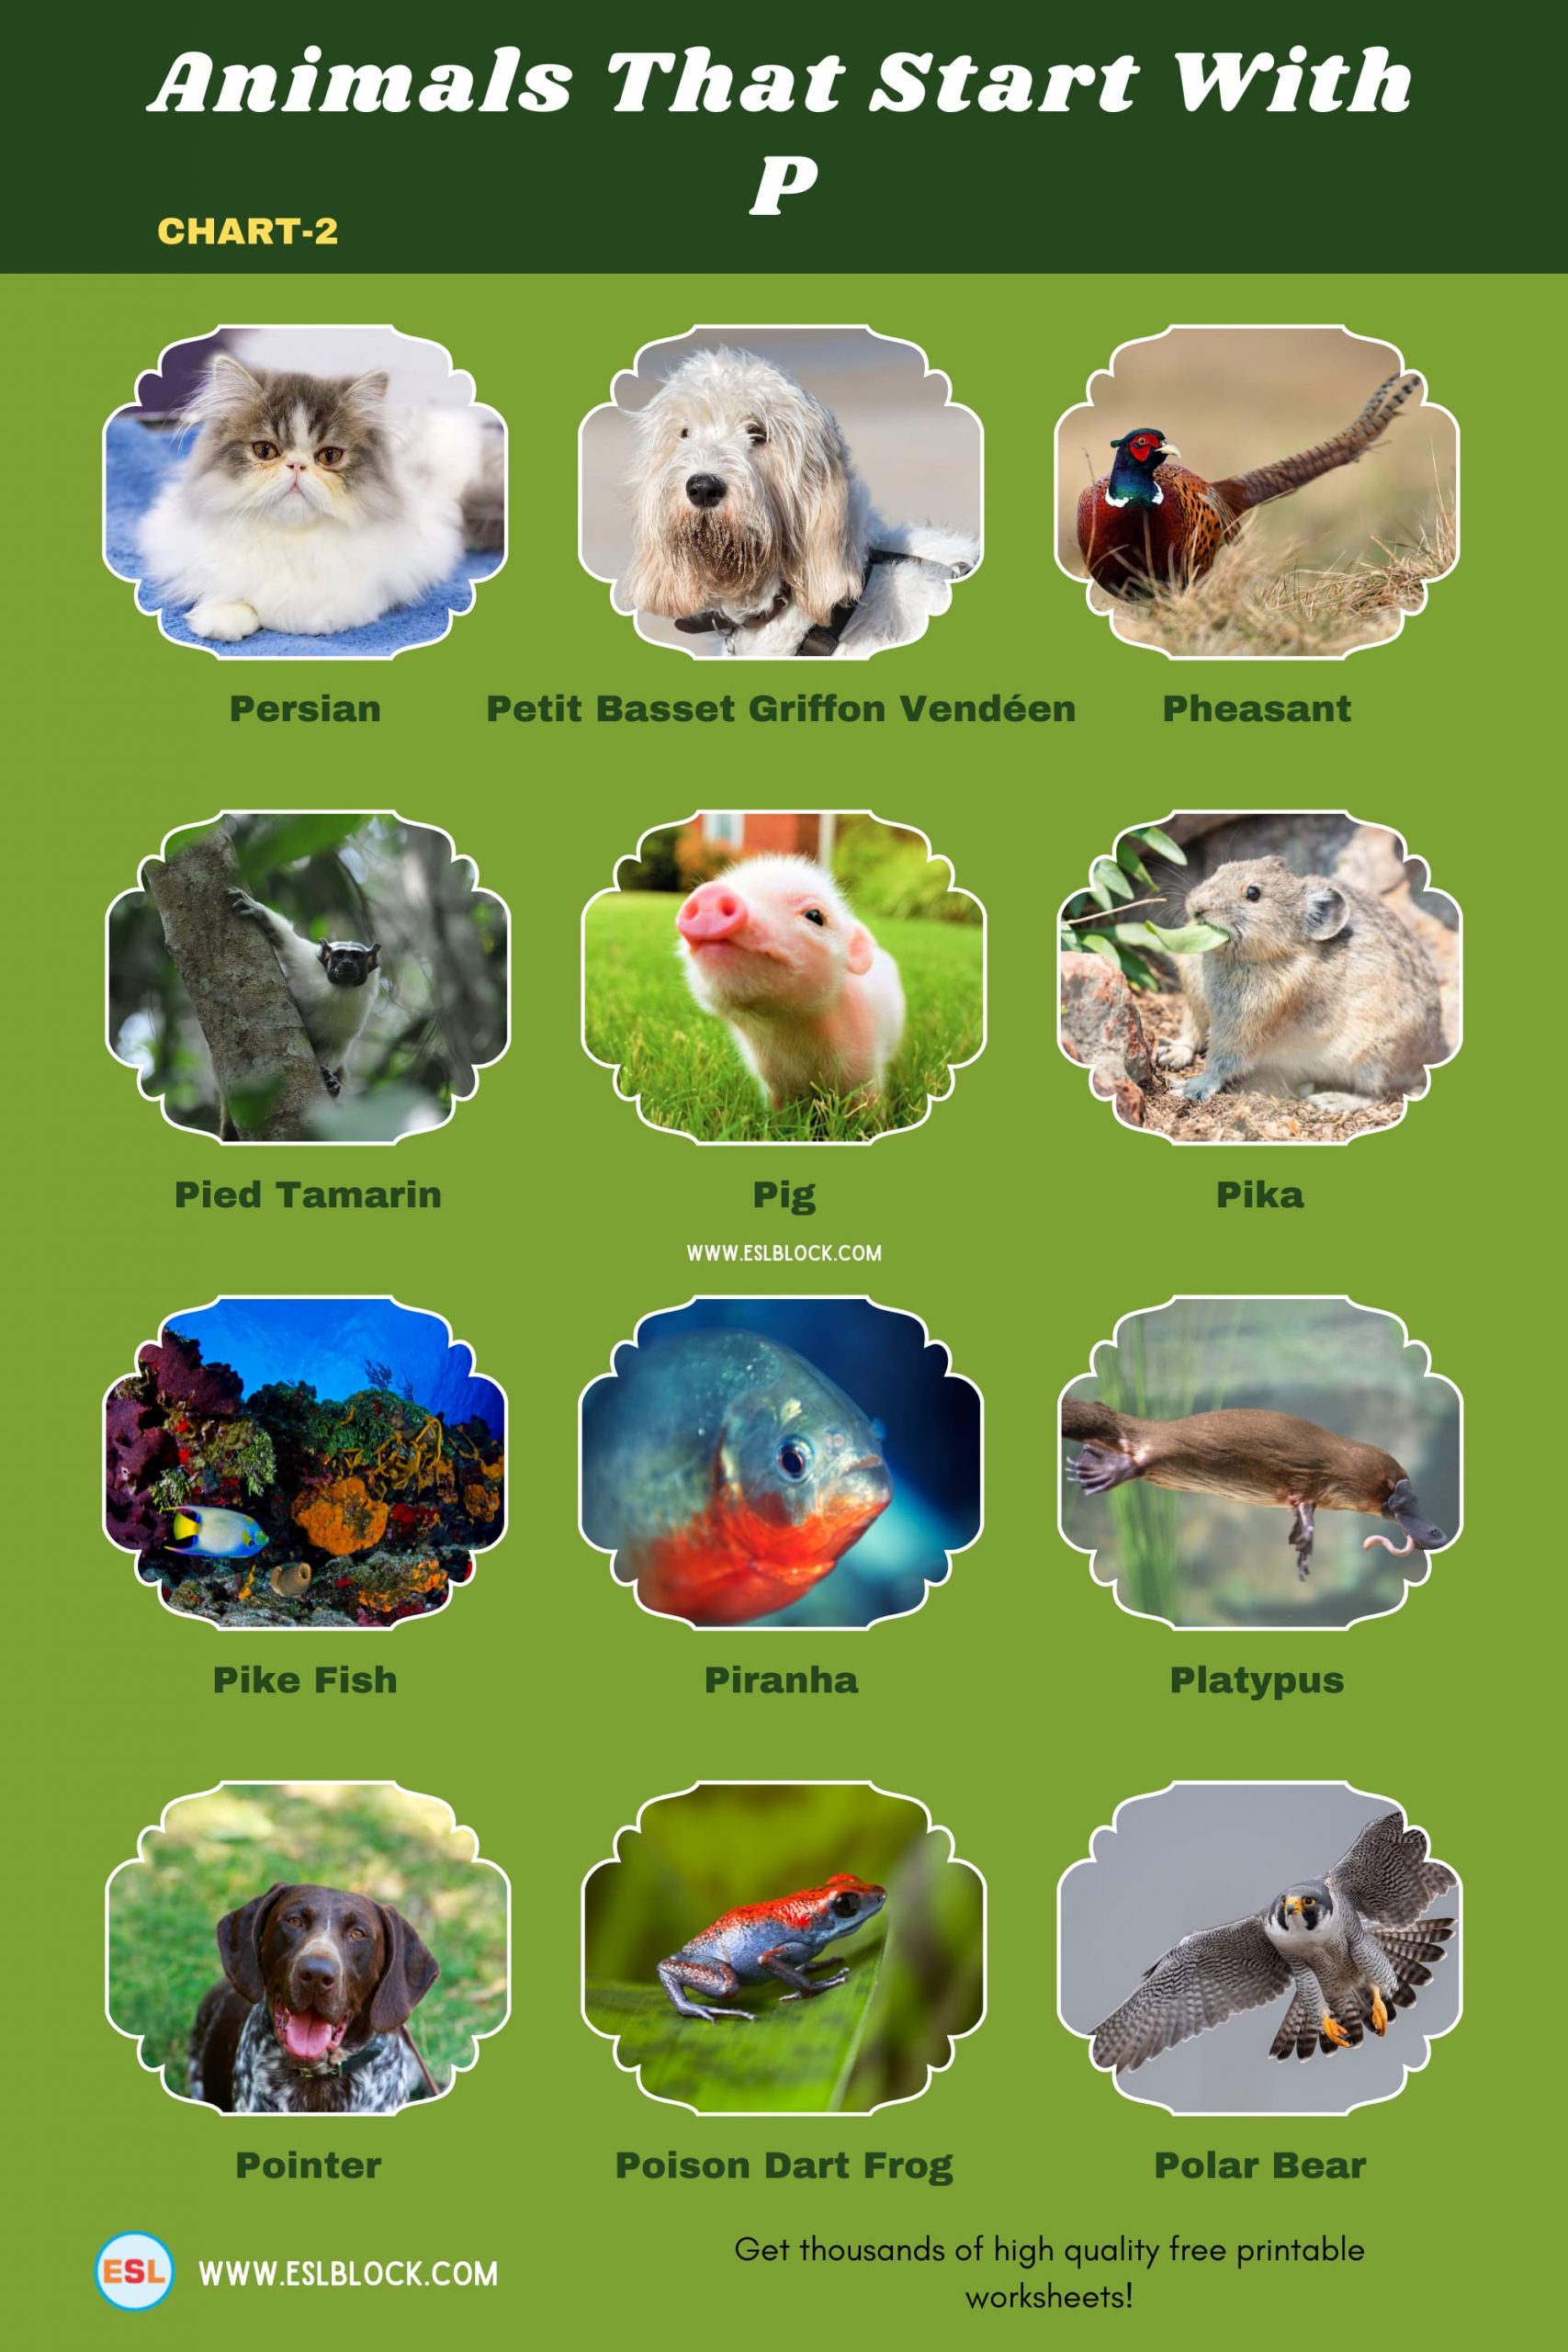 5 Letter Animals Starting With P, Animals List, Animals Names, Animals That Begins With P, Animals That Start With P, English, English Nouns, English Vocabulary, English Words, List of Animals That Start With P, Nouns, P Animals, P Animals in English, P Animals Names, Vocabulary